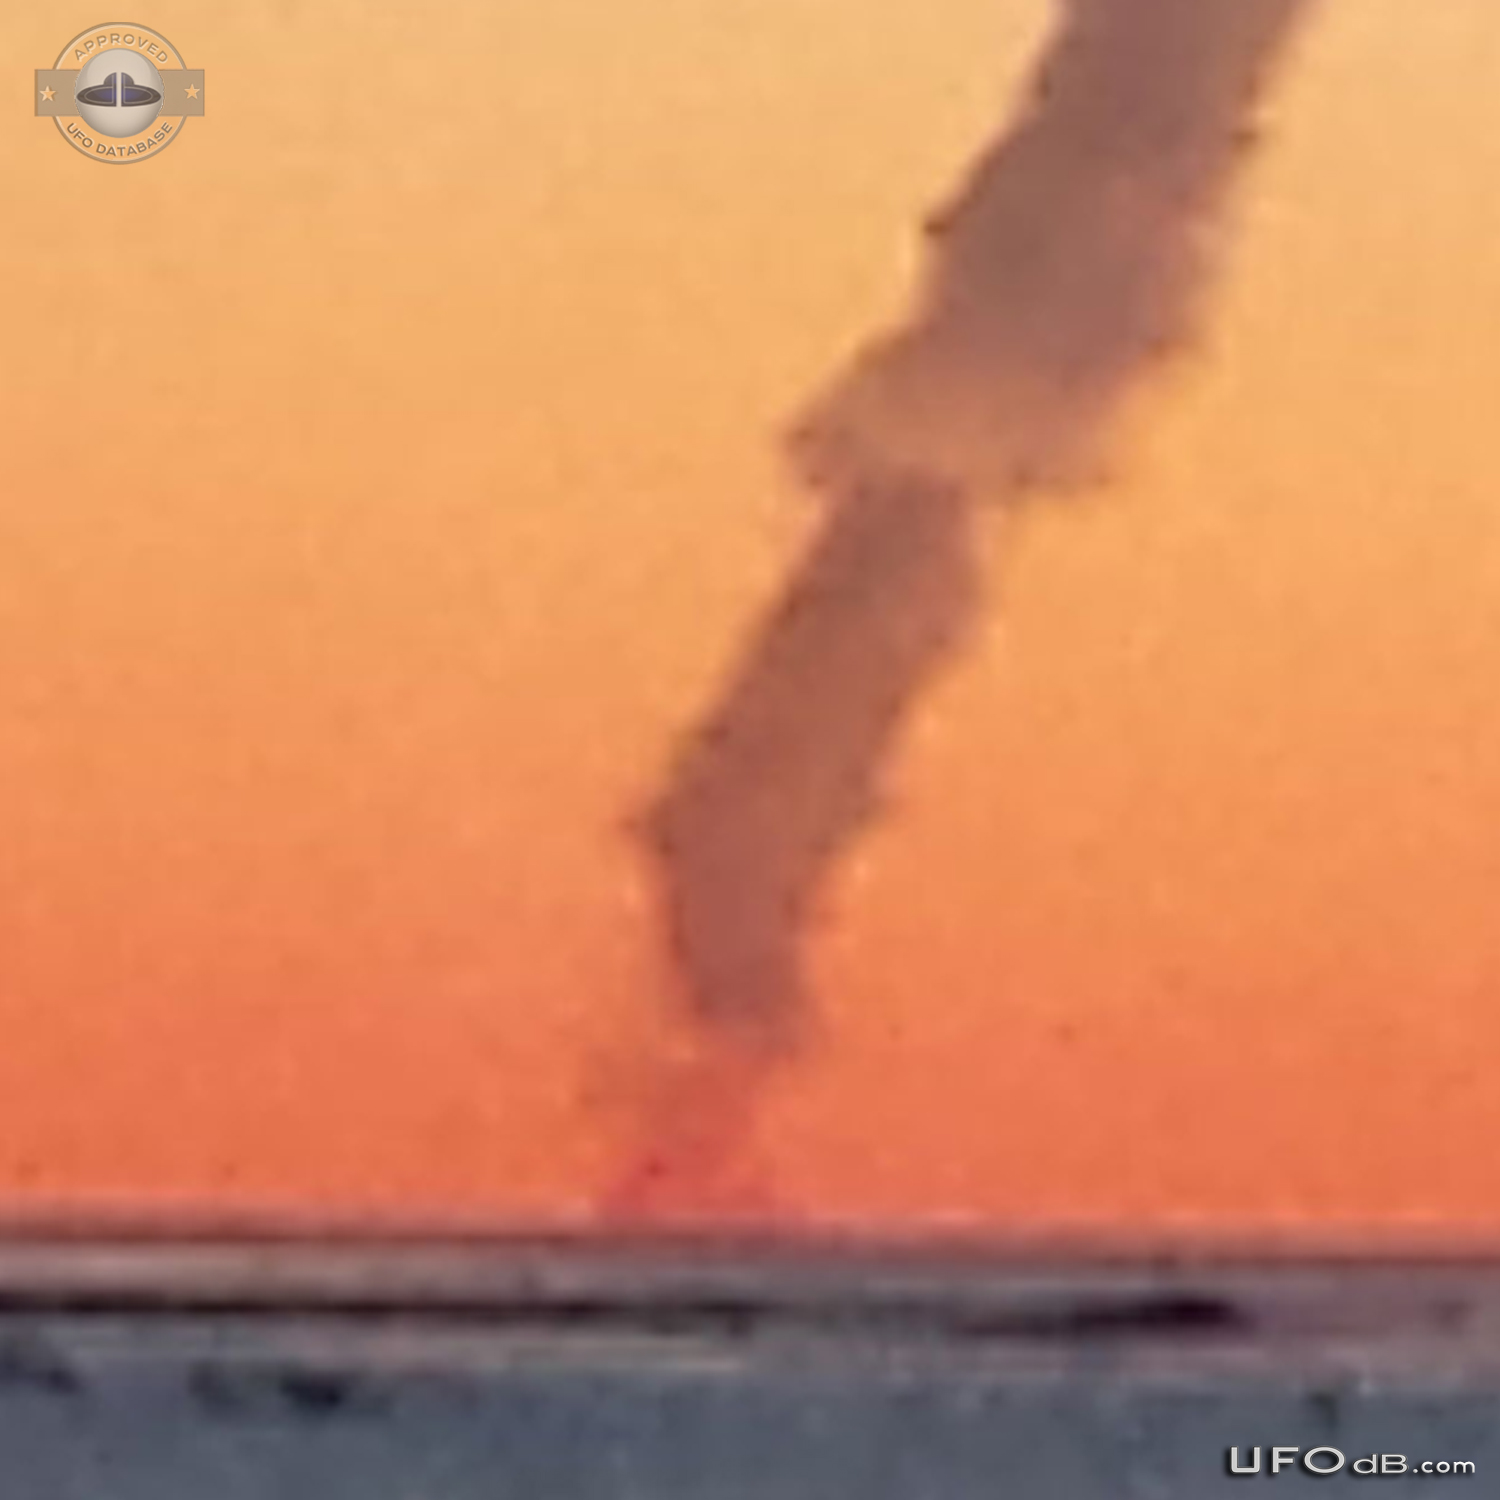 UFO leave the water straight up out in 5 seconds Alakanuk, Alaska USA UFO Picture #621-3